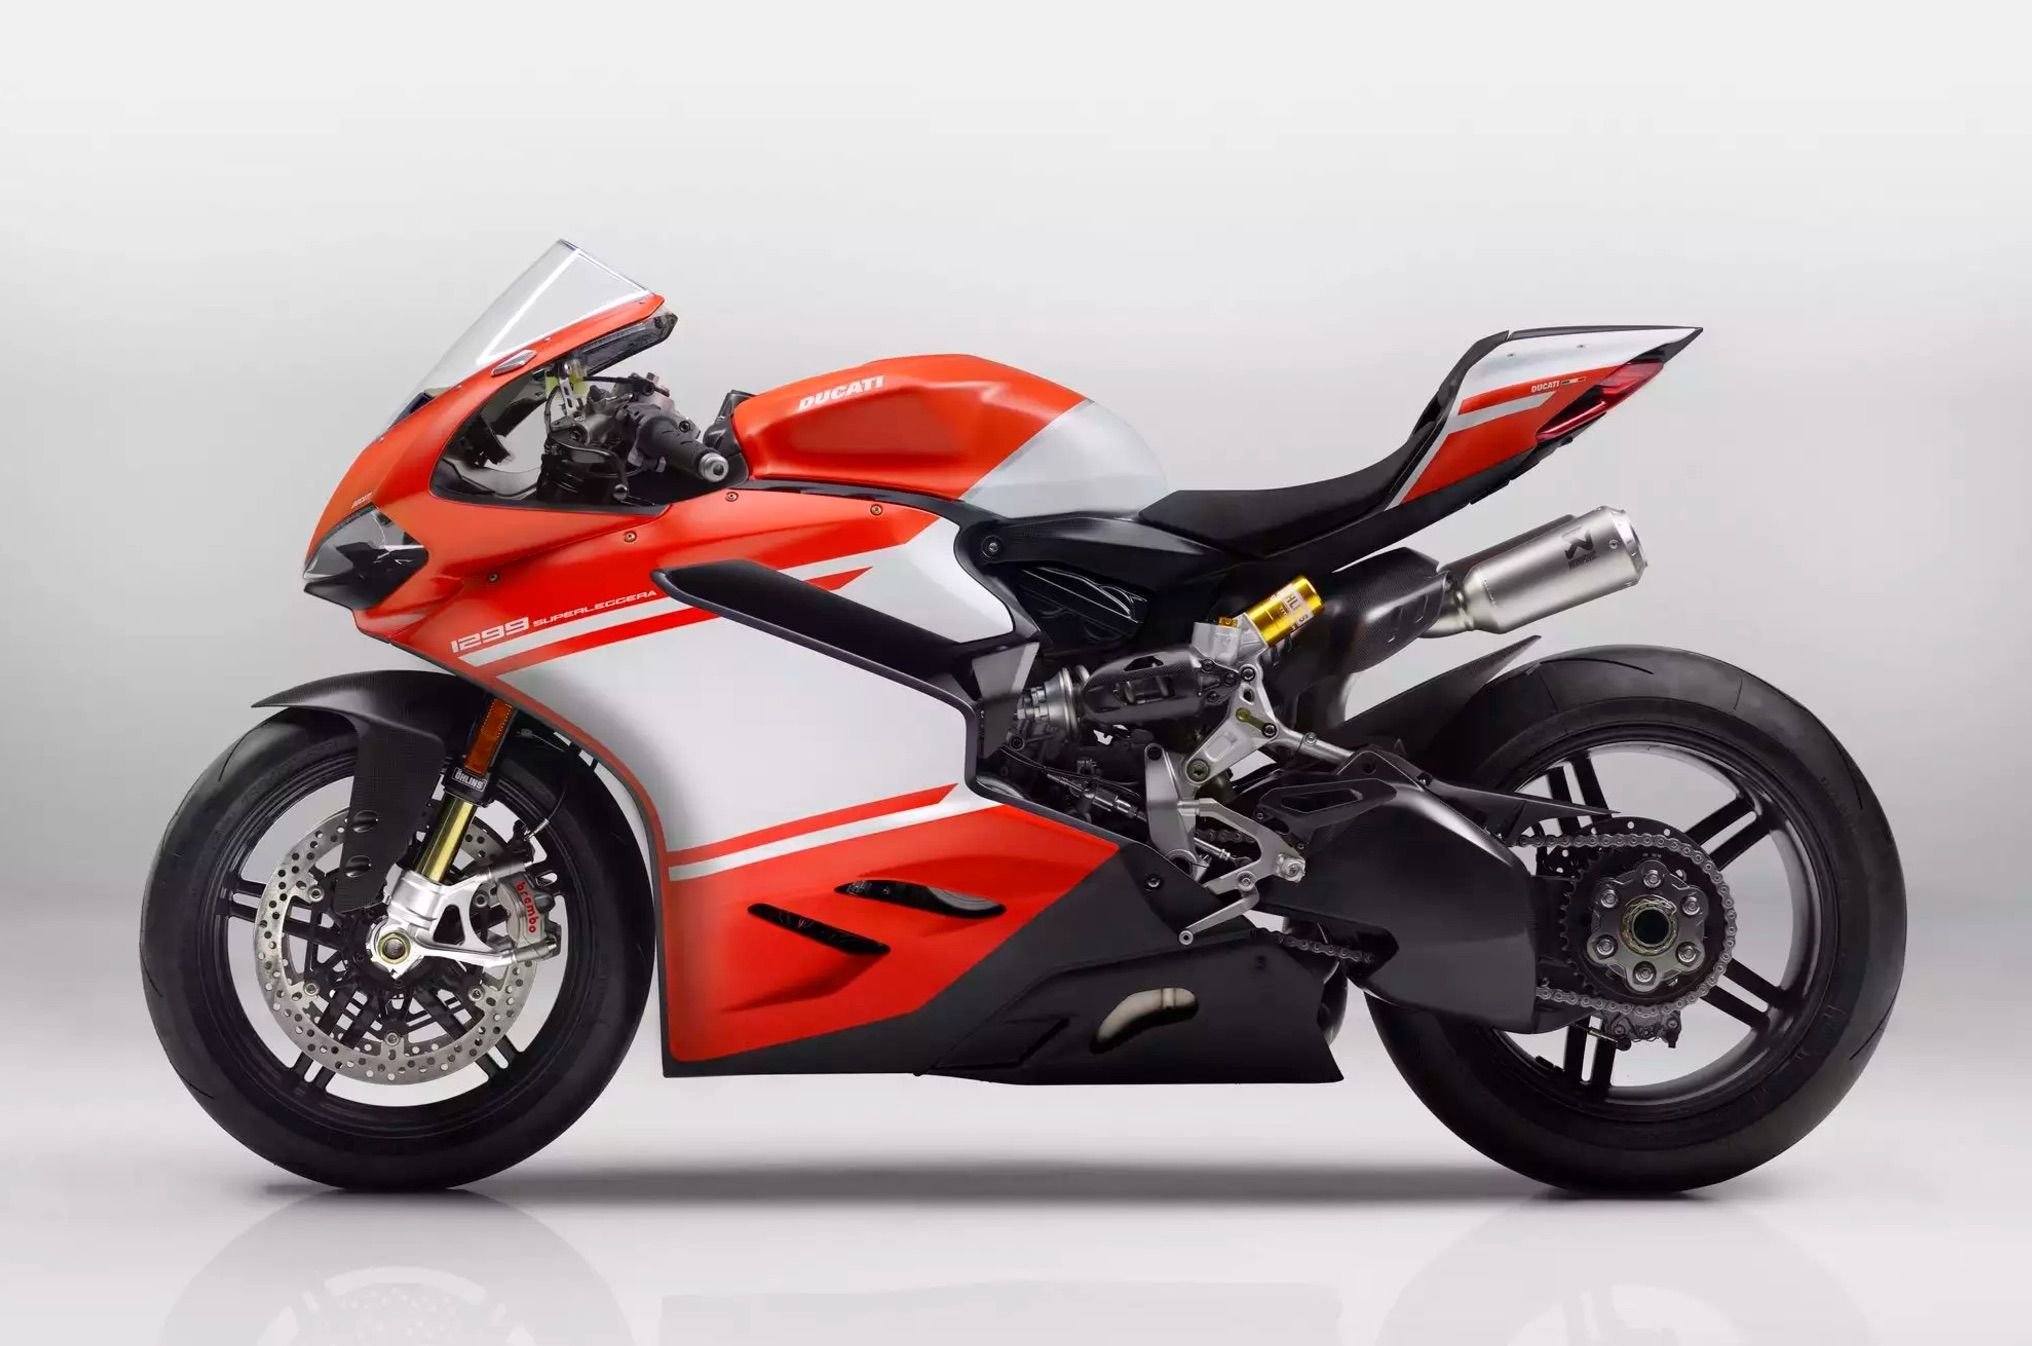 Ducati's 1299 Superleggera is the most powerful twin-cylinder production bike ever produced